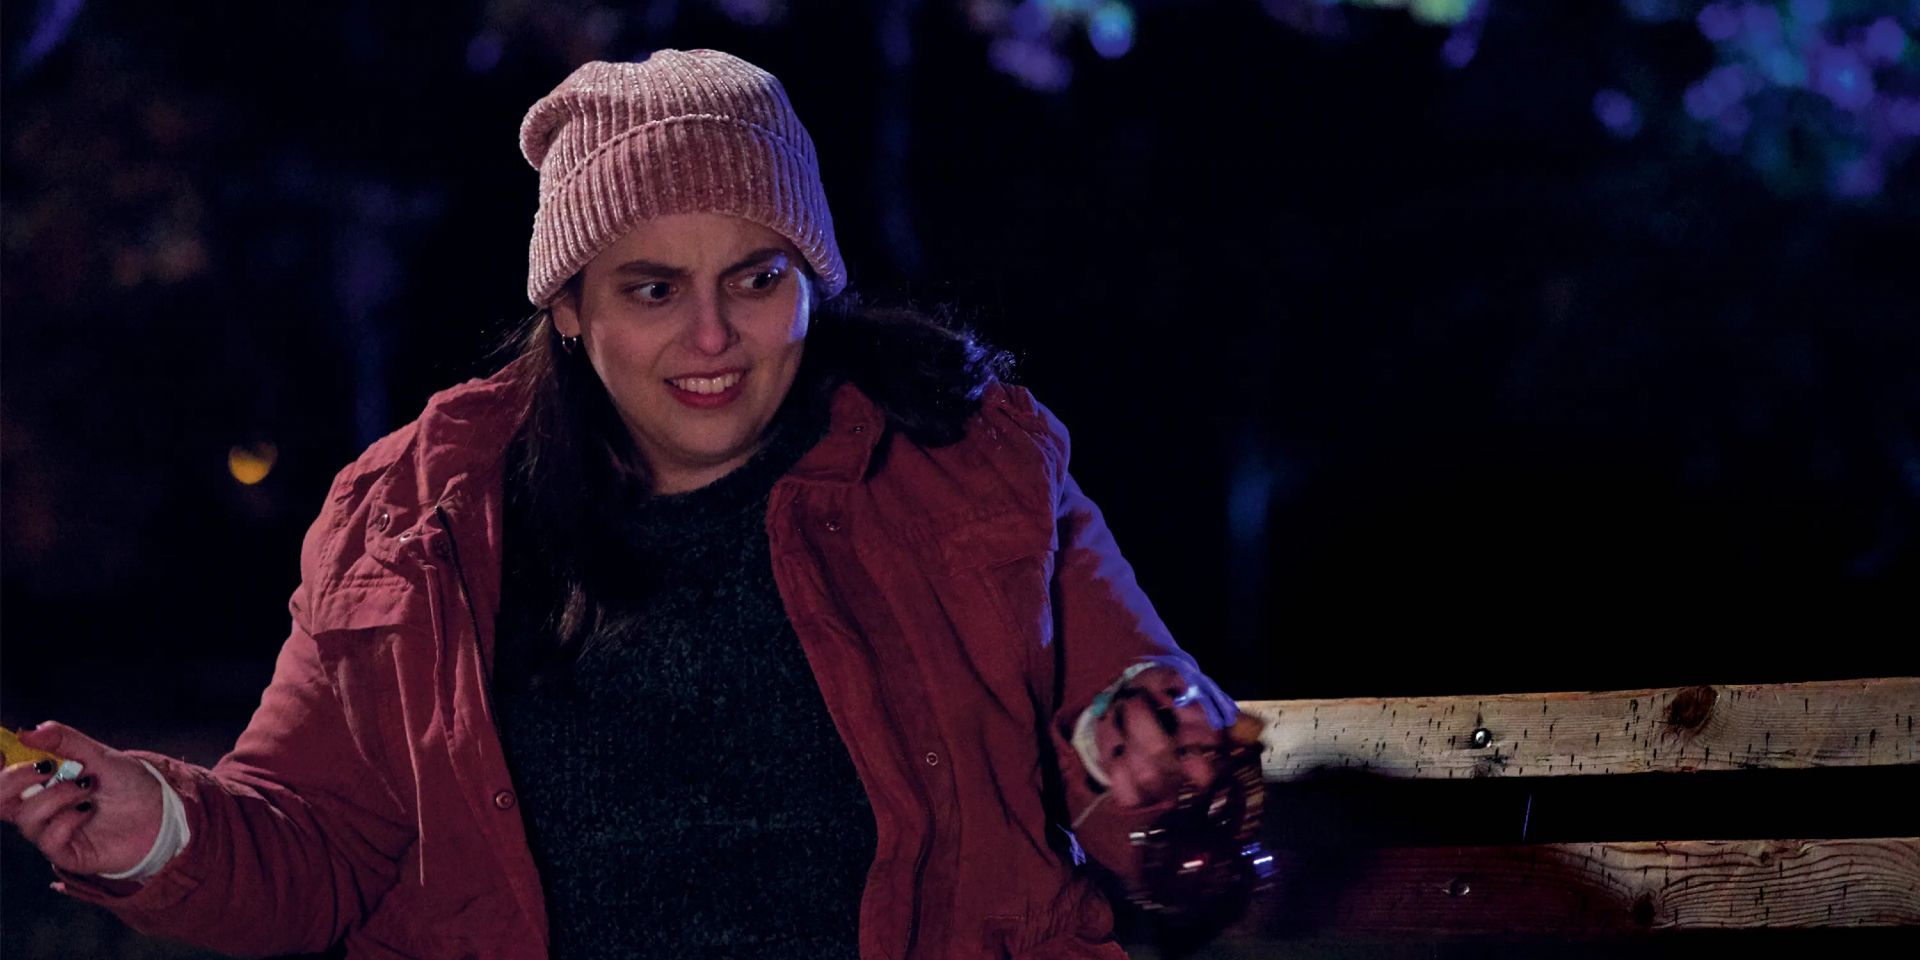 Jenna sits outside in a pink jacket in What We Do in the Shadows.